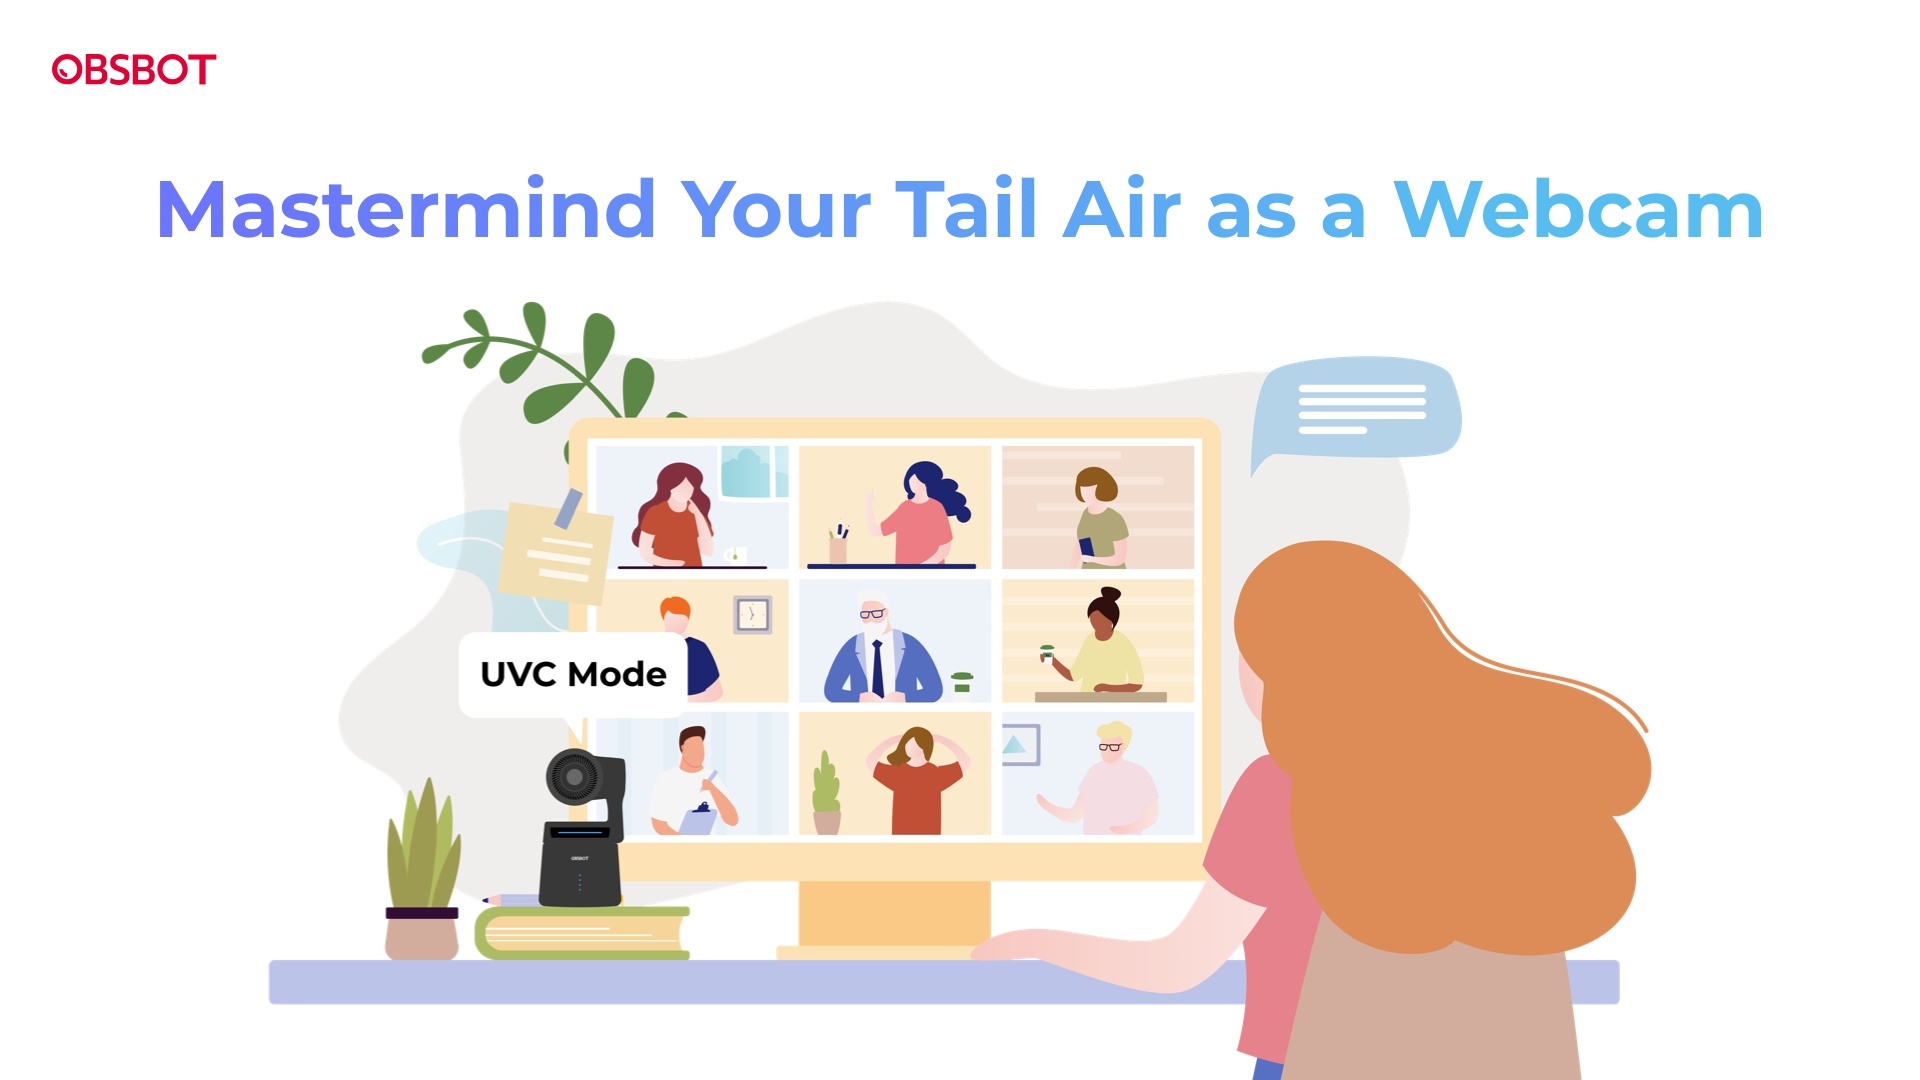 set your tail air as a webcam